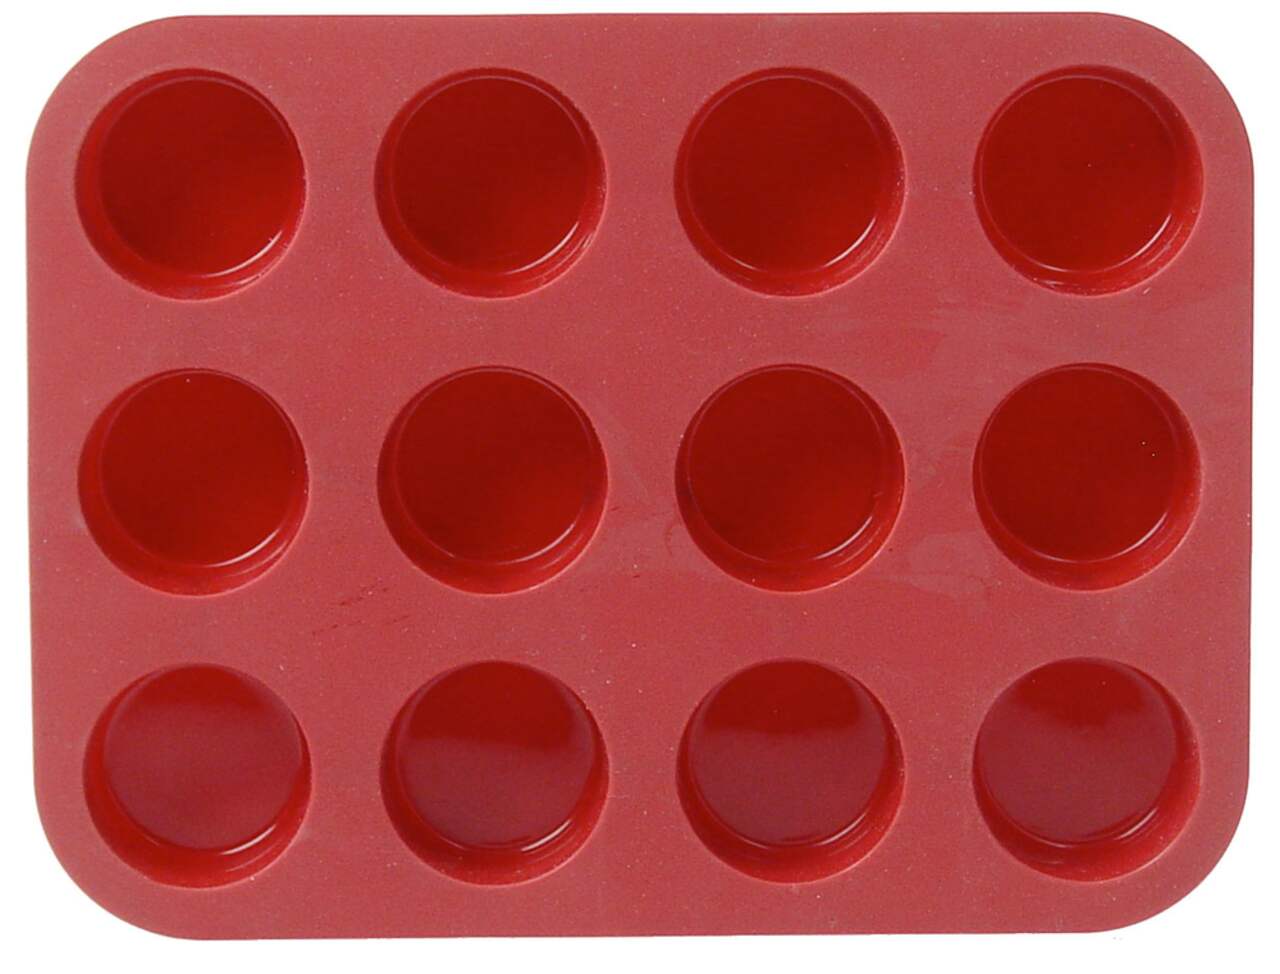 https://media-www.canadiantire.ca/product/living/kitchen/bakeware-baking-prep/0422803/masterchef-12-cup-silicone-muffin-pan-1f05d167-9452-4302-b436-aed6d1572c8c.png?imdensity=1&imwidth=640&impolicy=mZoom